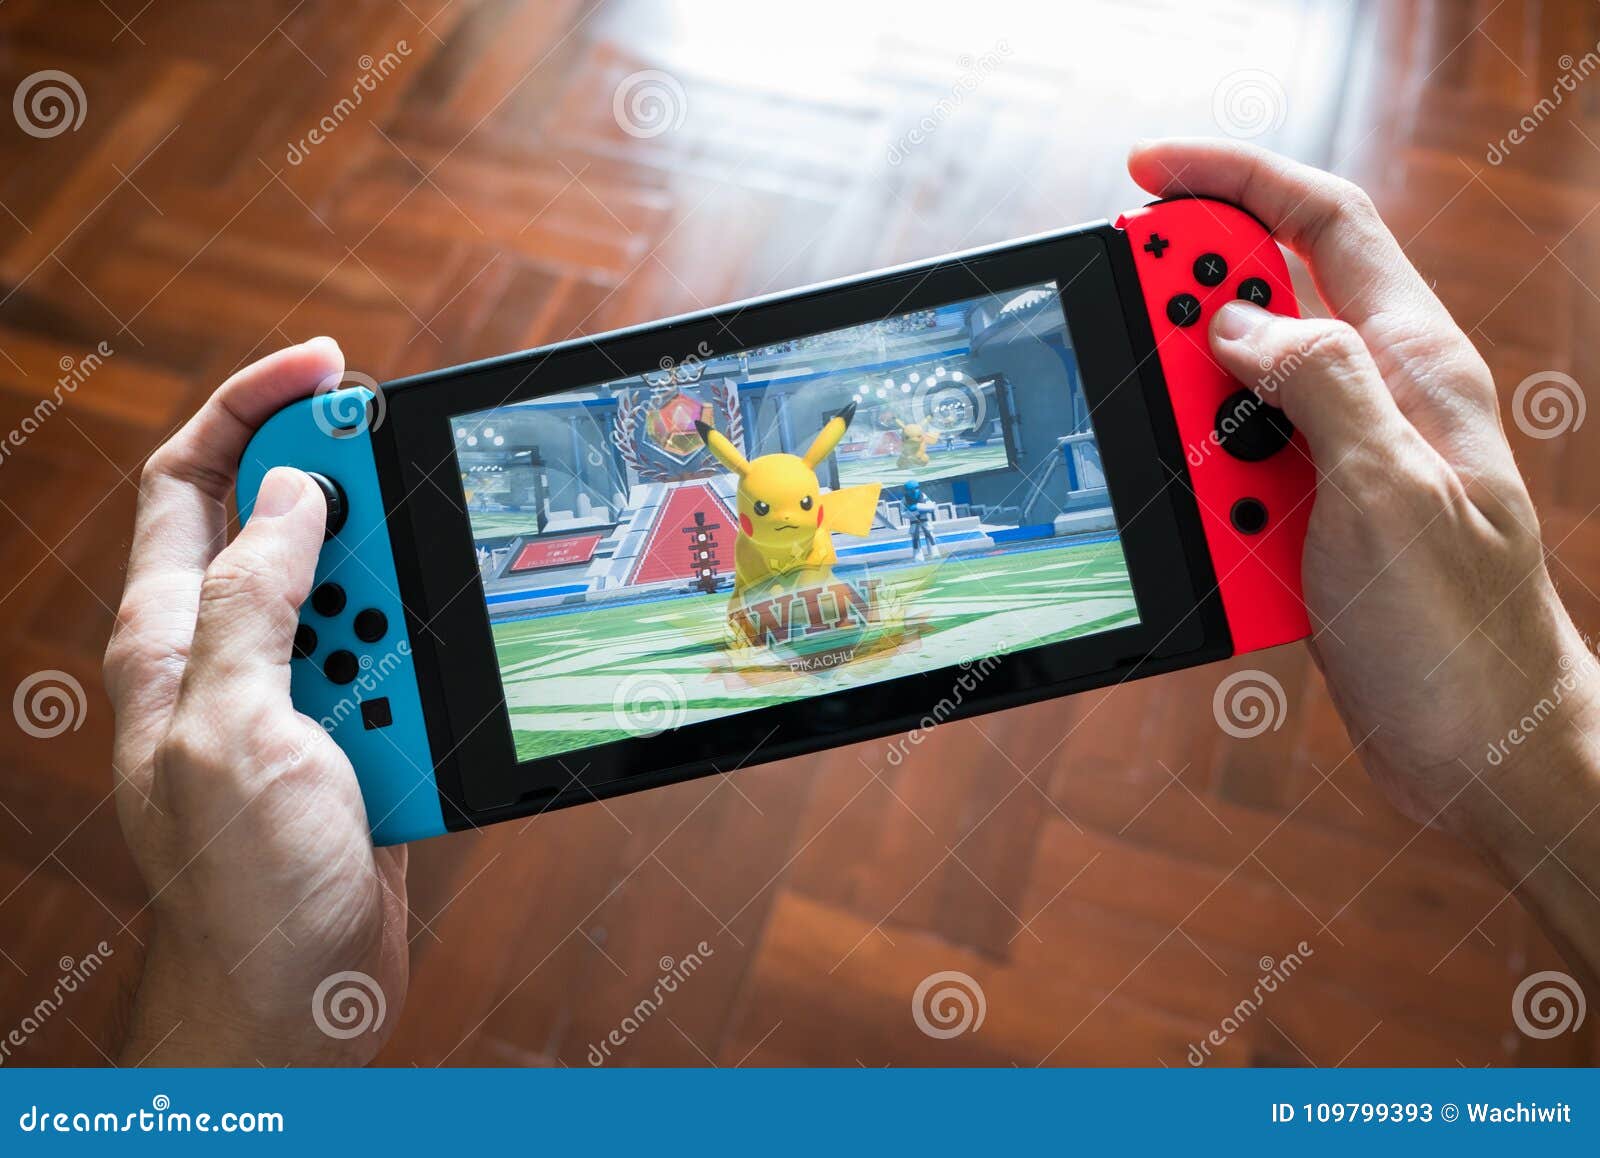 Pokken Tournament Game on Nintendo Switch Editorial Stock Photo - of play, console: 109799393